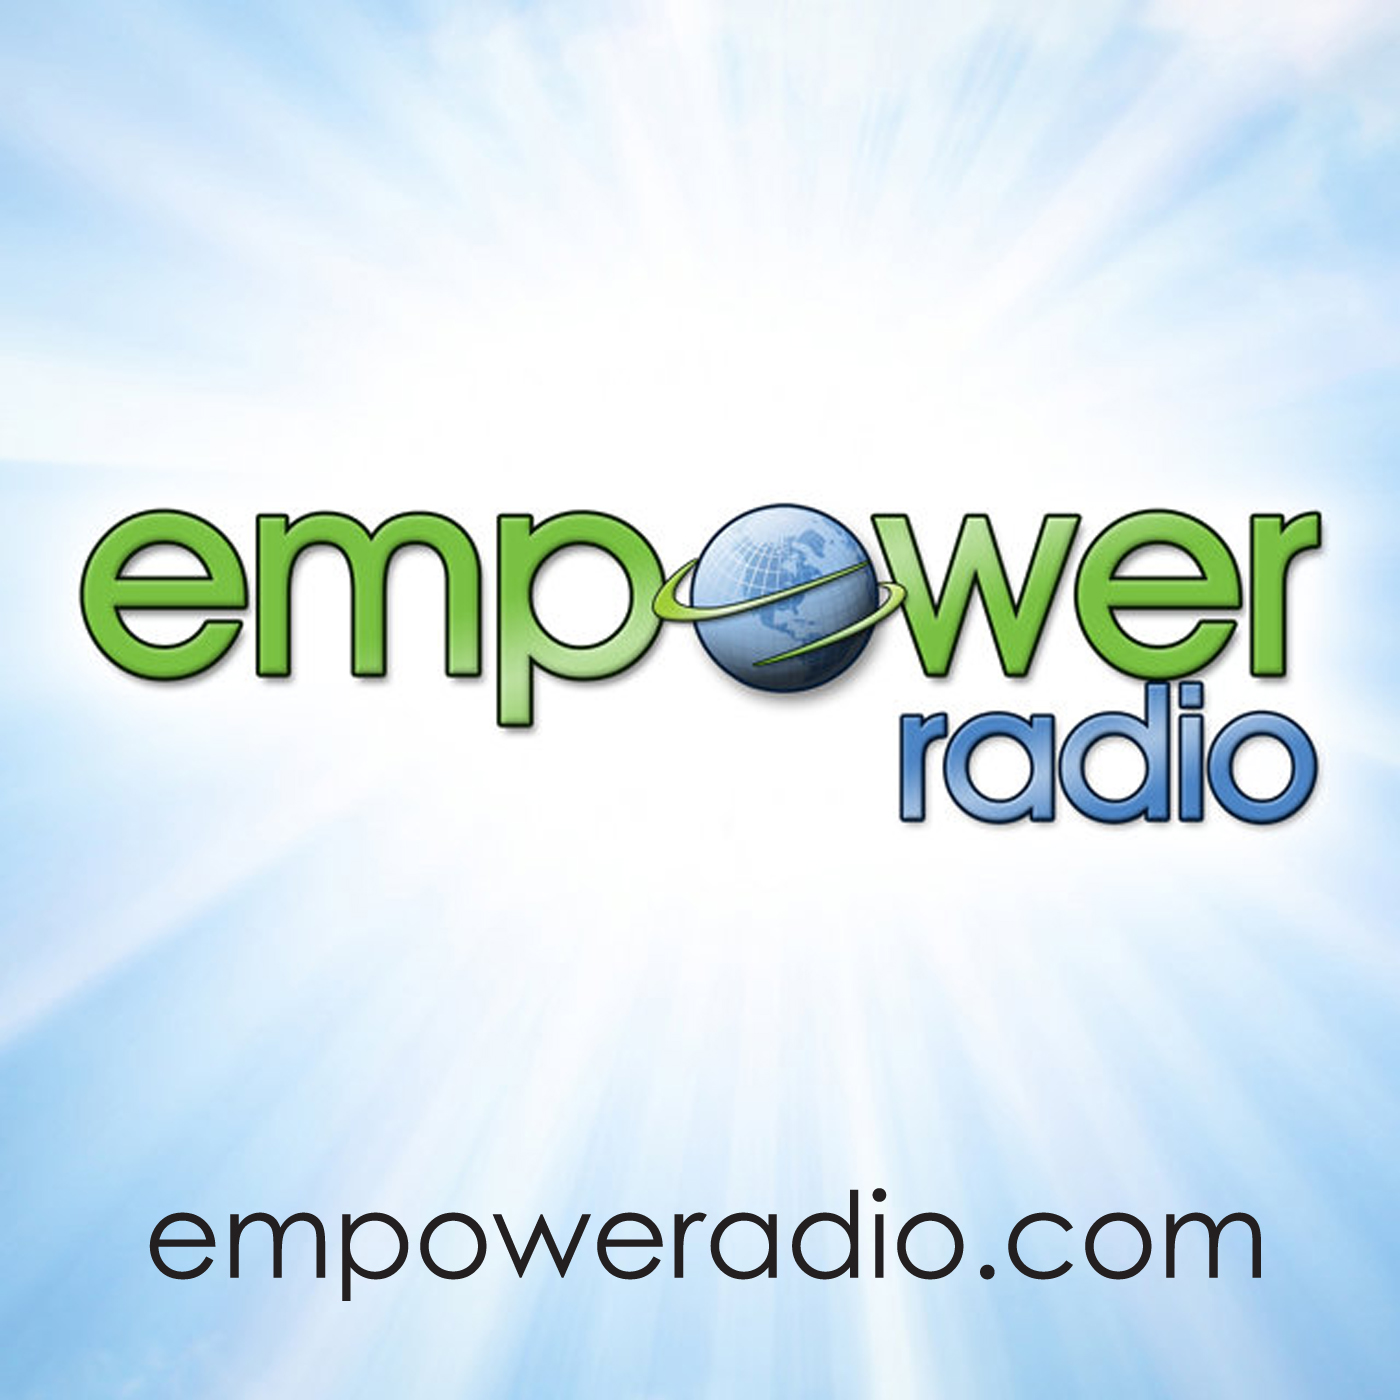 Empower Radio has a yearly audience of nearly one million listeners in 89 countries and all 50 states.